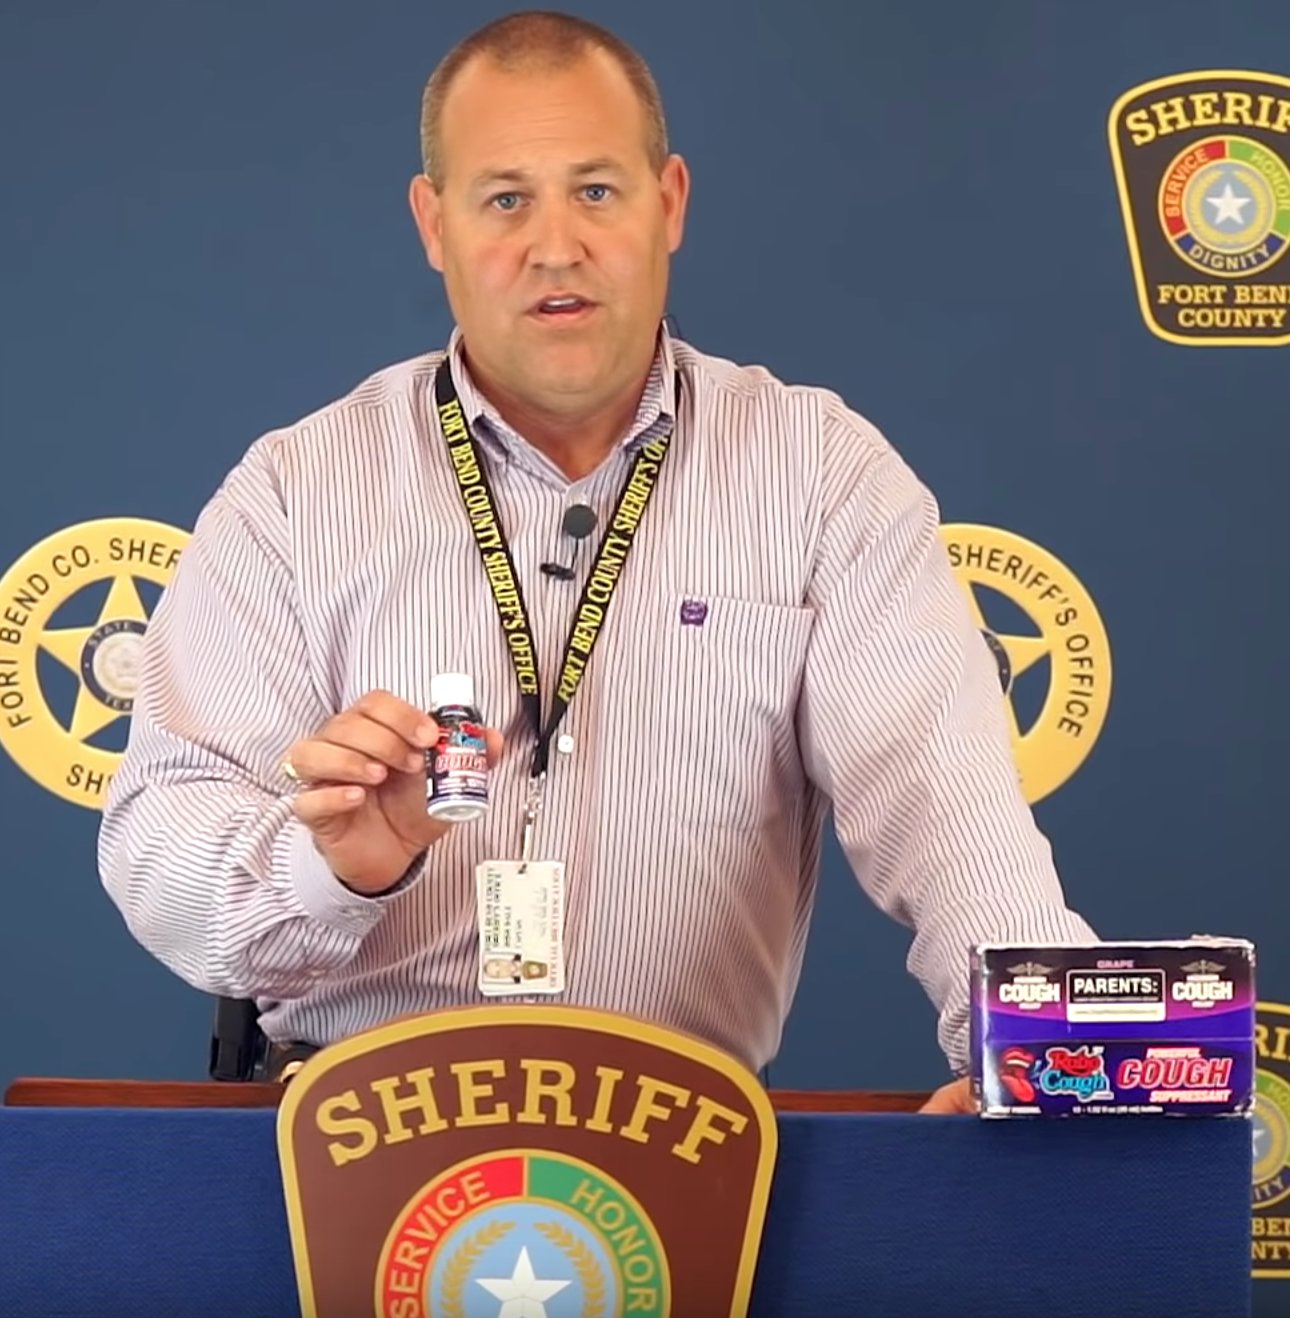 Josh Dale of the Fort Bend County Narcotics Task Force discusses the dangers of the over-the-counter drug Robo Cough.